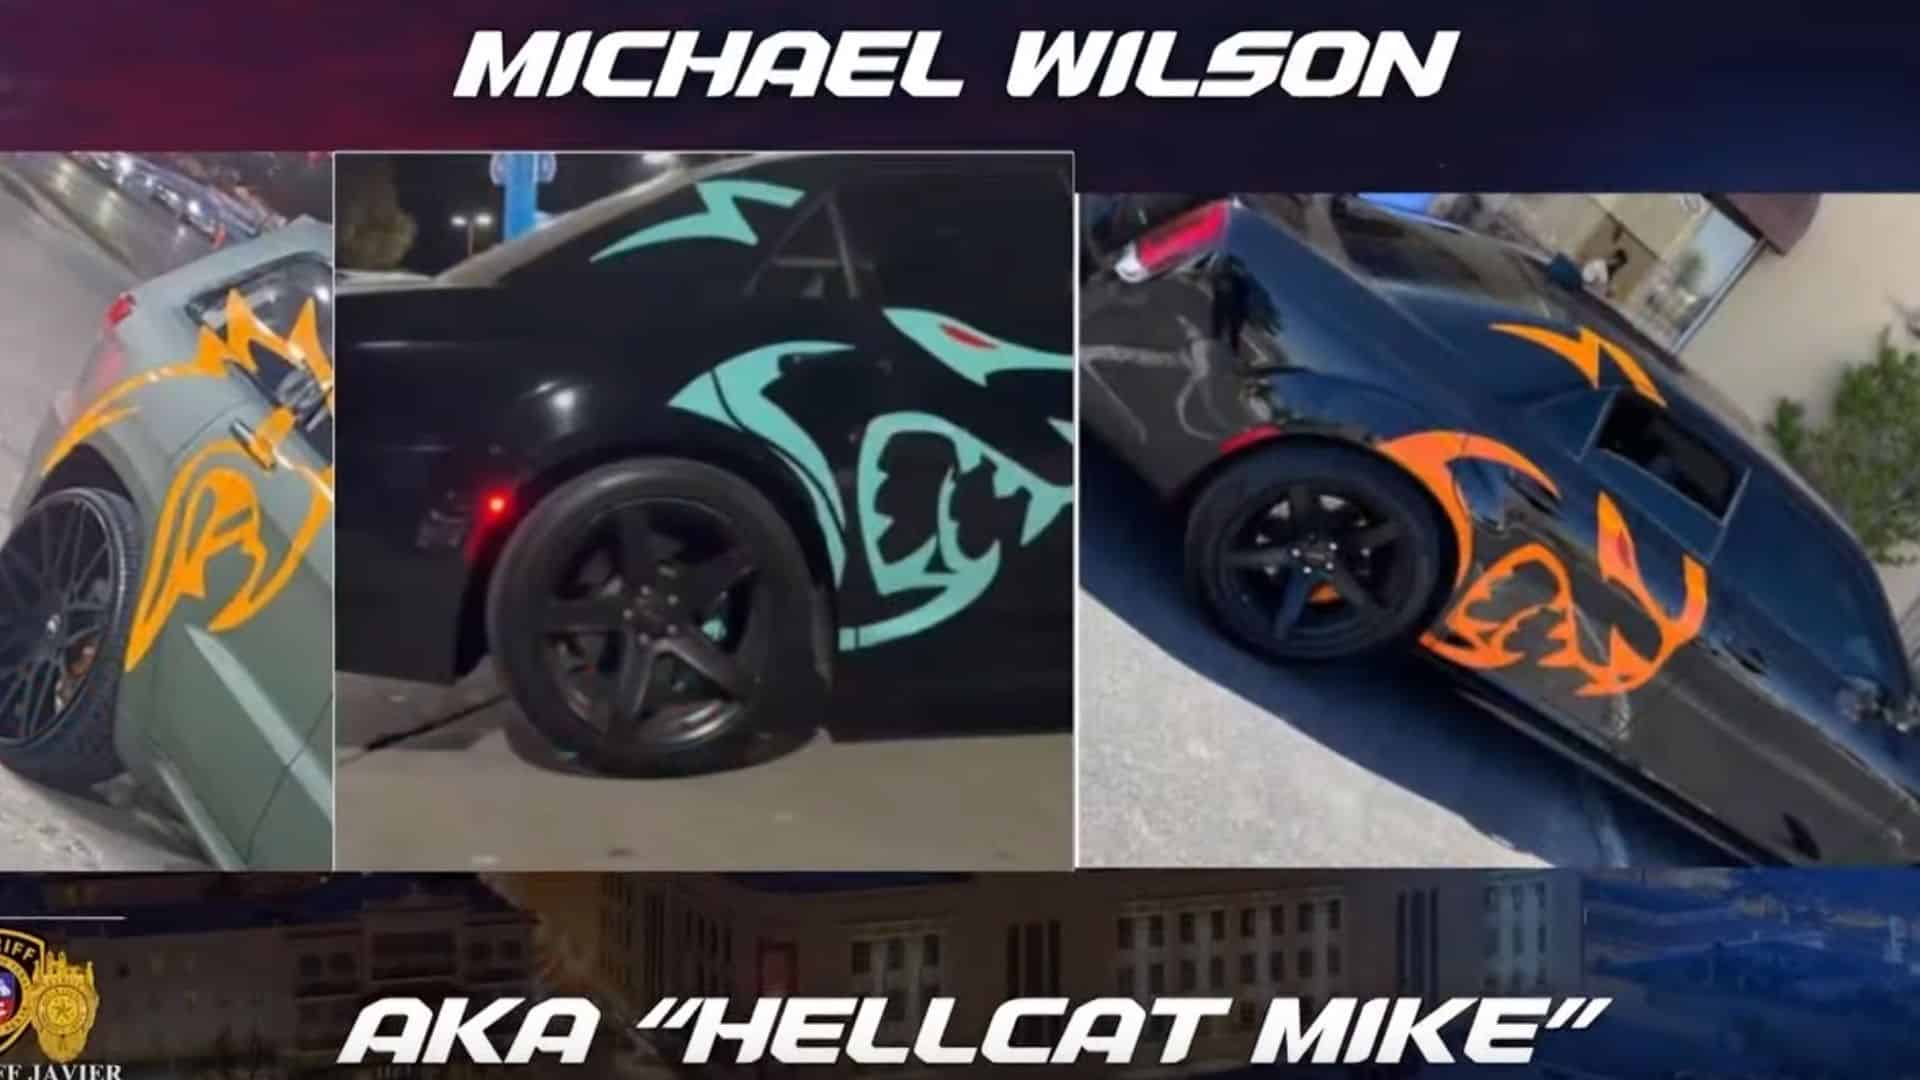 Operation Hellcat Mike Nets Several Arrests